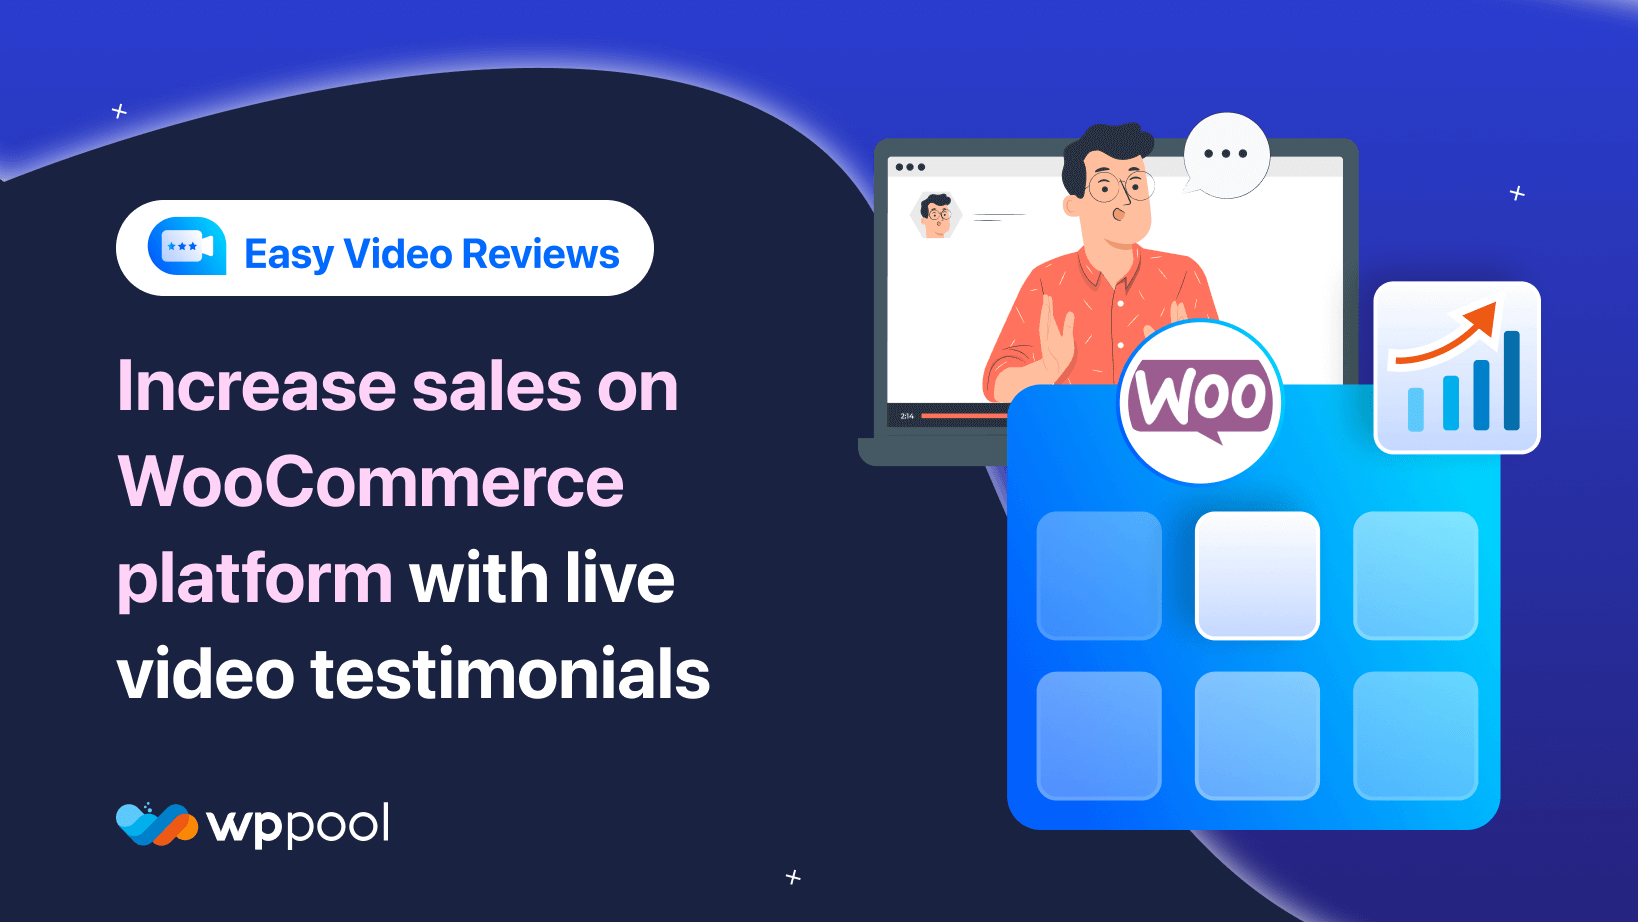 Collect video testimonials and increase sales on WooCommerce platform with live video testimonials